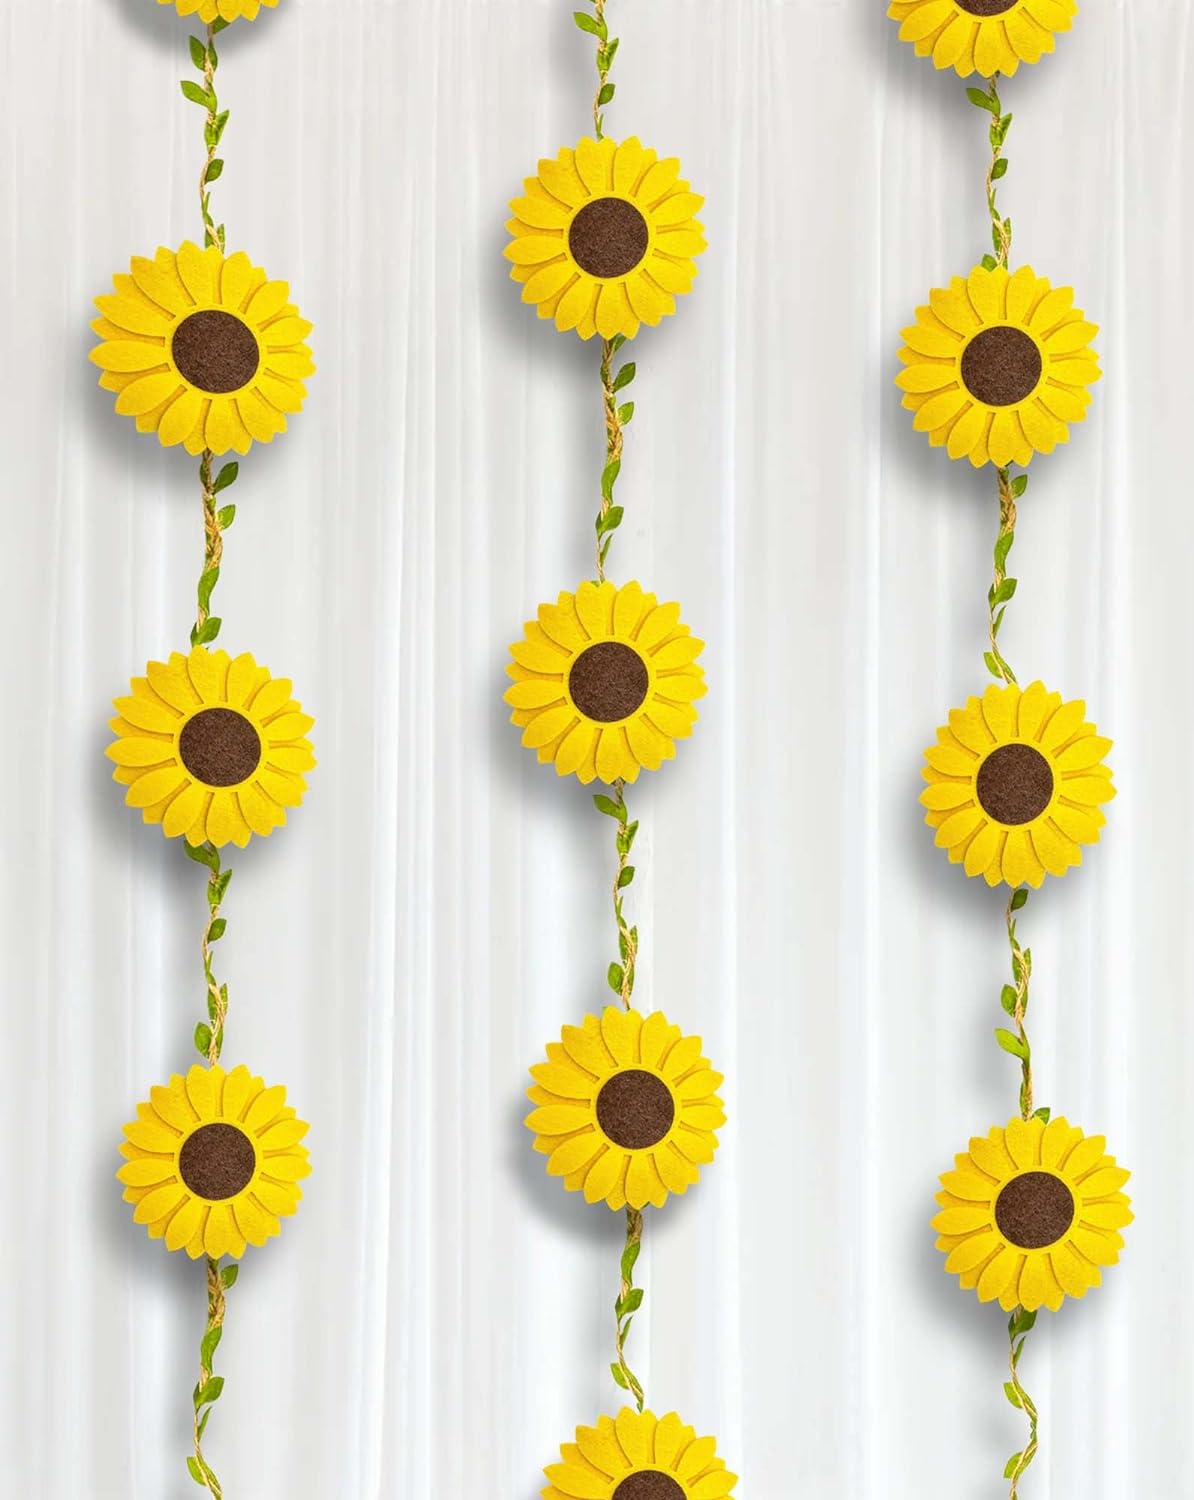 Sunflower hangings for aesthetic look